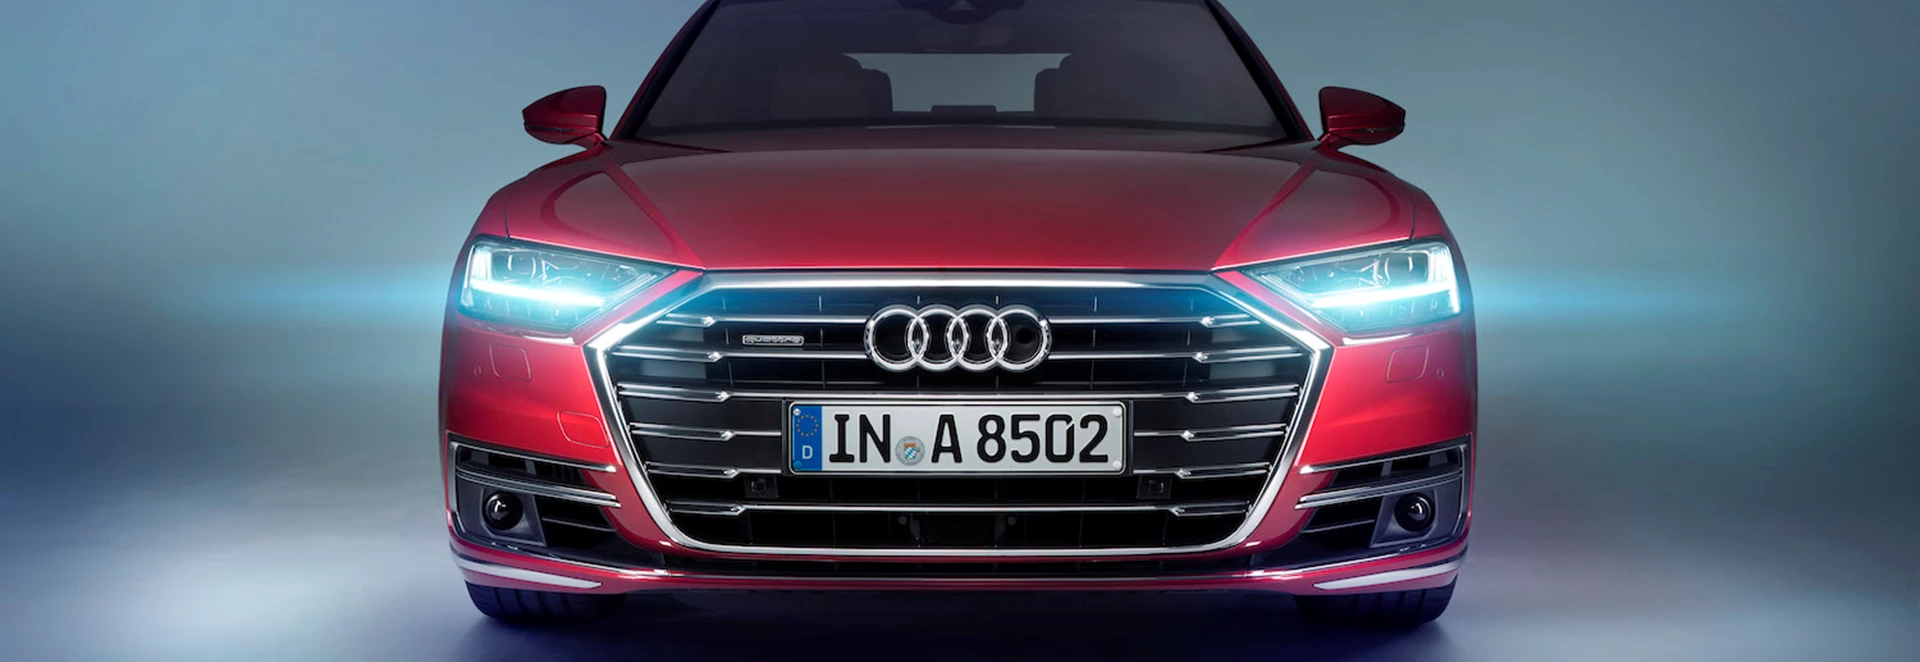 Buyer’s Guide to the Audi A8